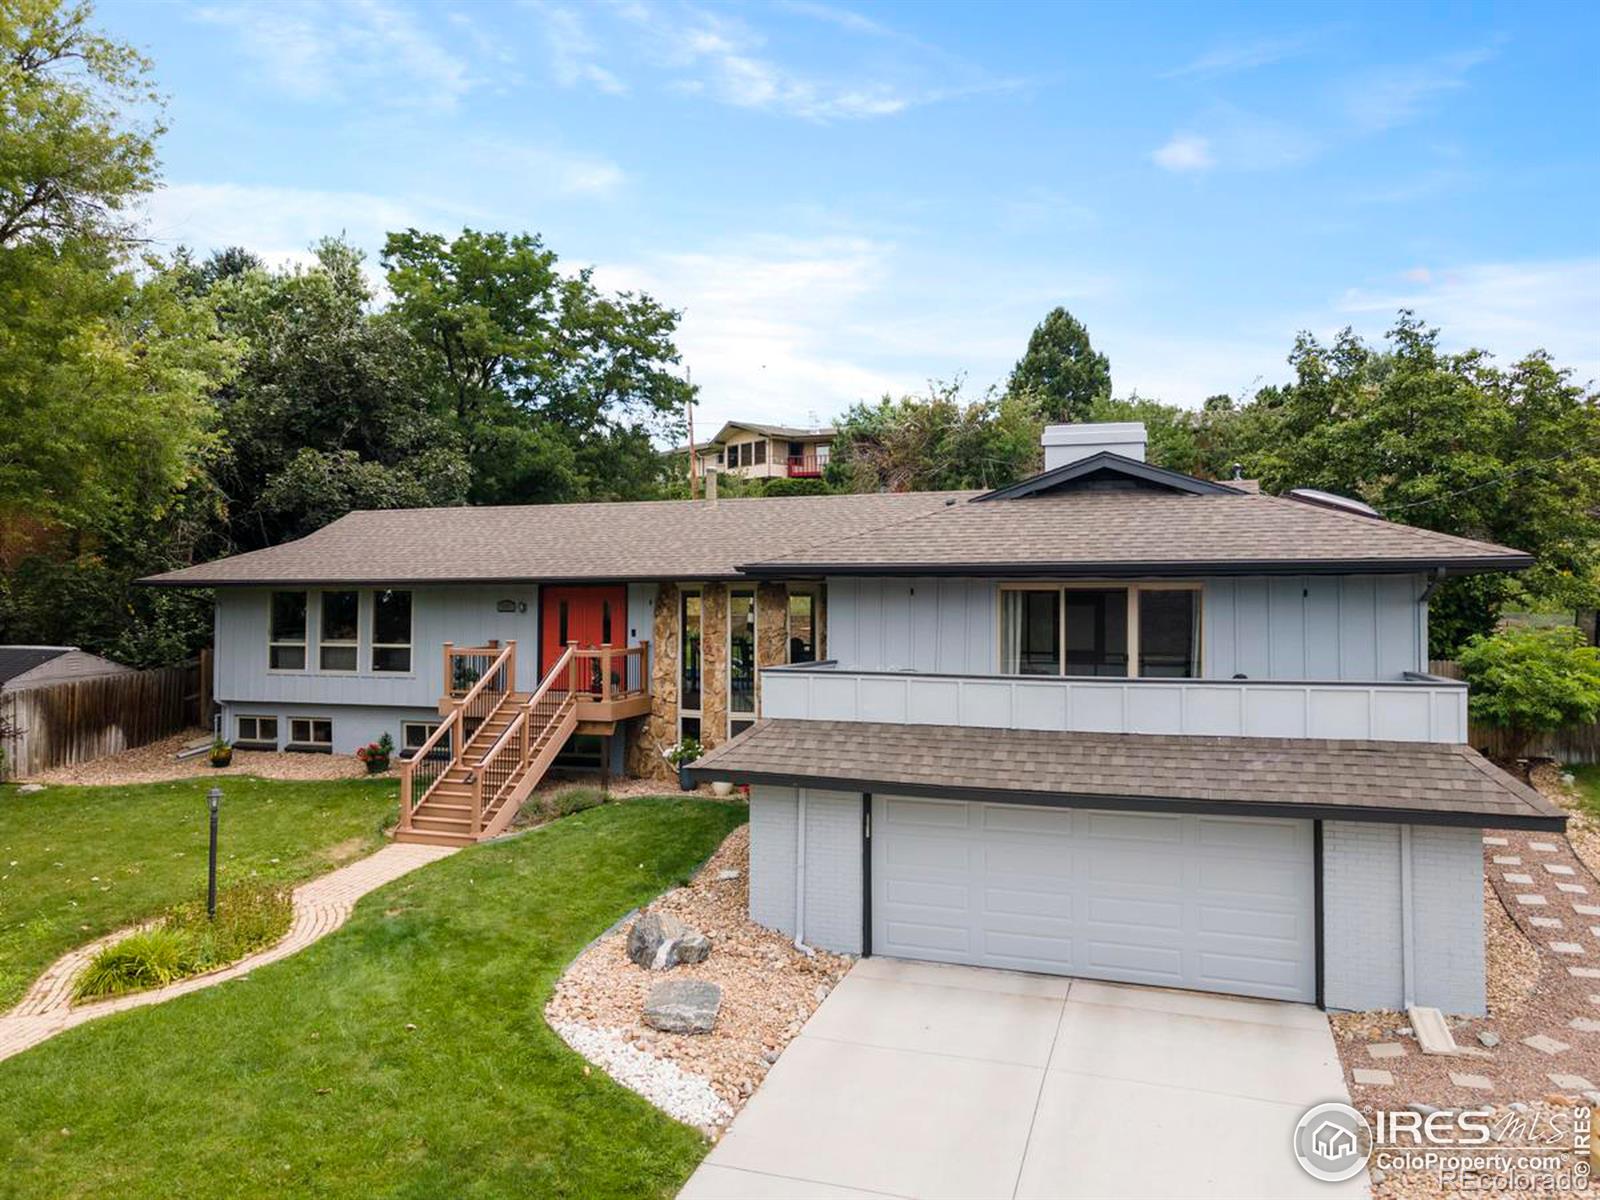 6976  Dudley Drive, arvada MLS: 123456789994028 Beds: 4 Baths: 4 Price: $925,000